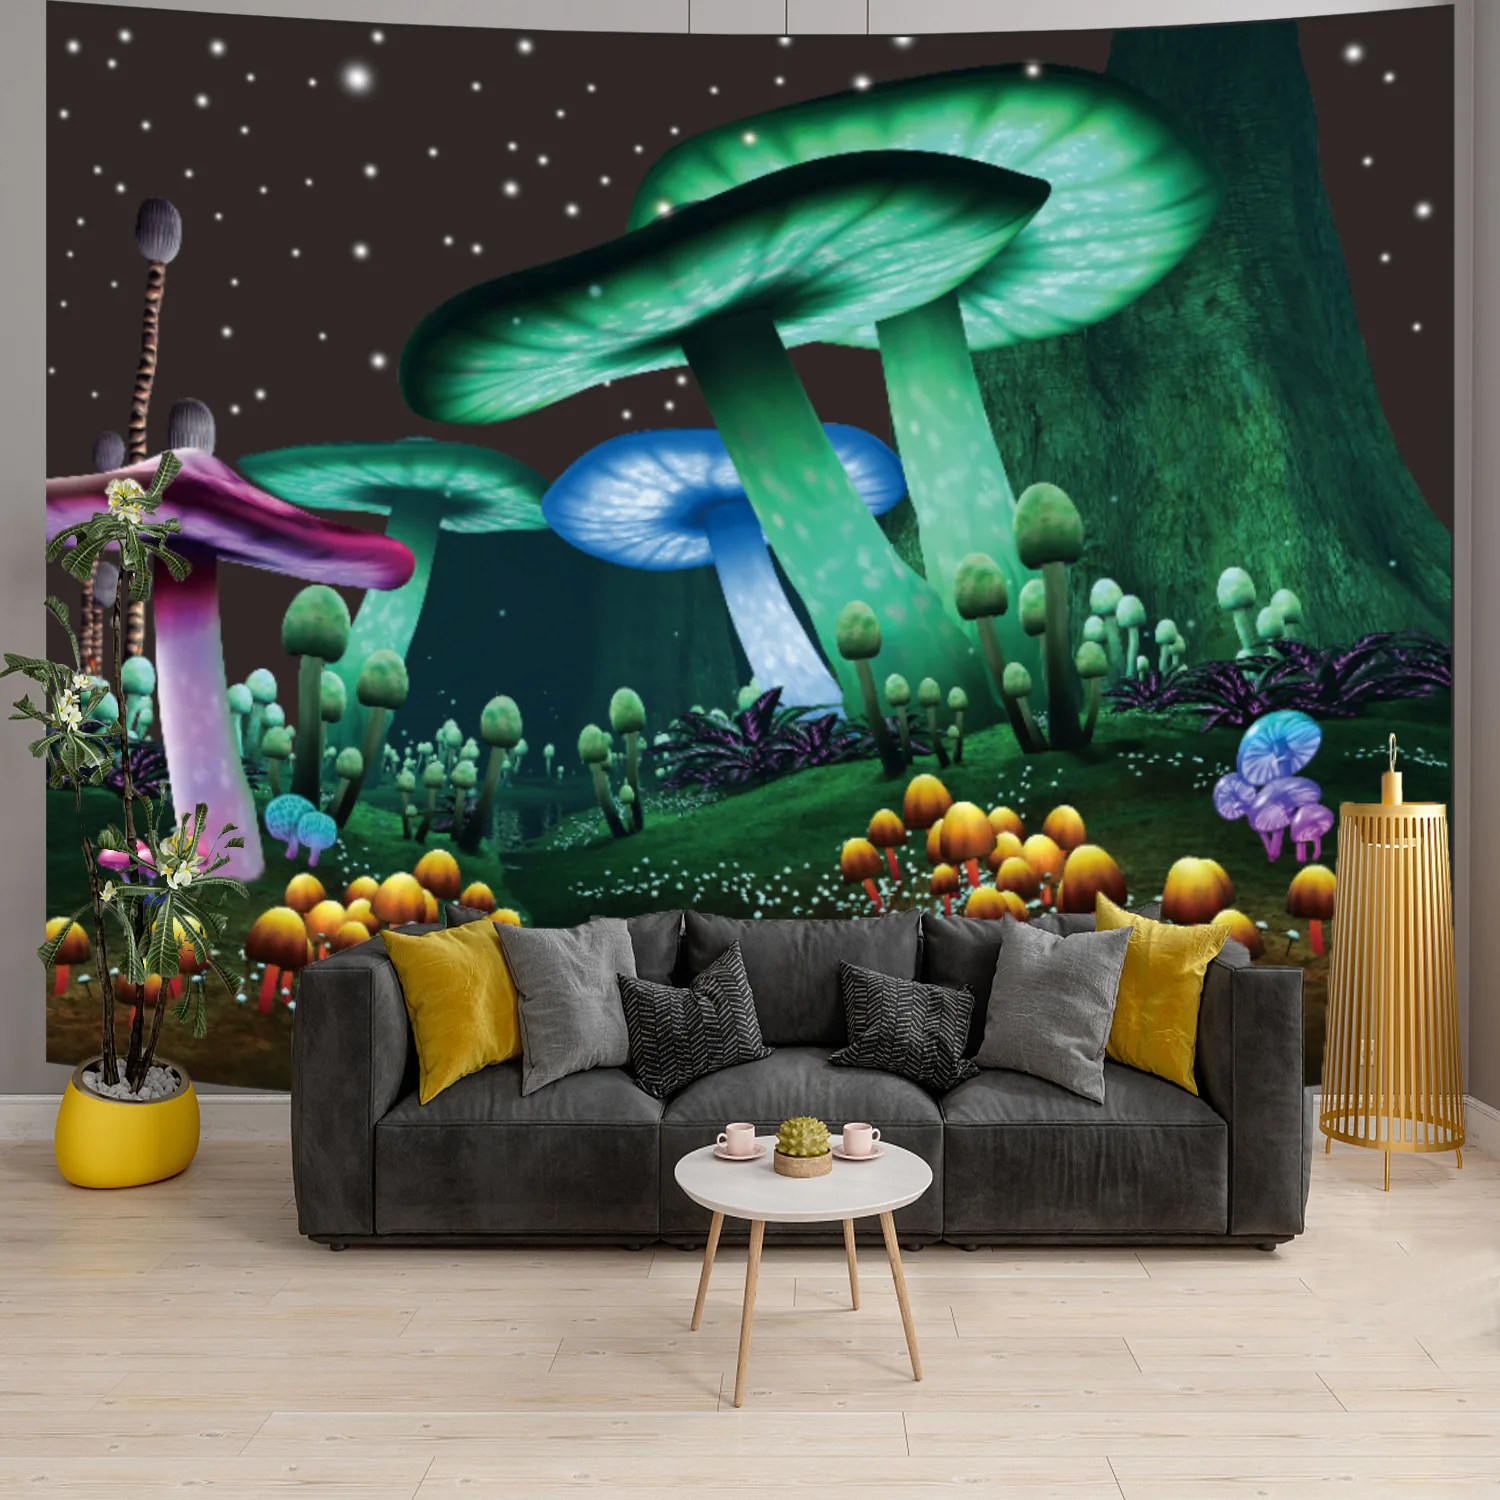 

Mushroom Forest Castle Tapestry Wall Hanging Nature Starry Sky Hippy Psychedelic Background Wall Cloth Carpet Decor 200*150cm